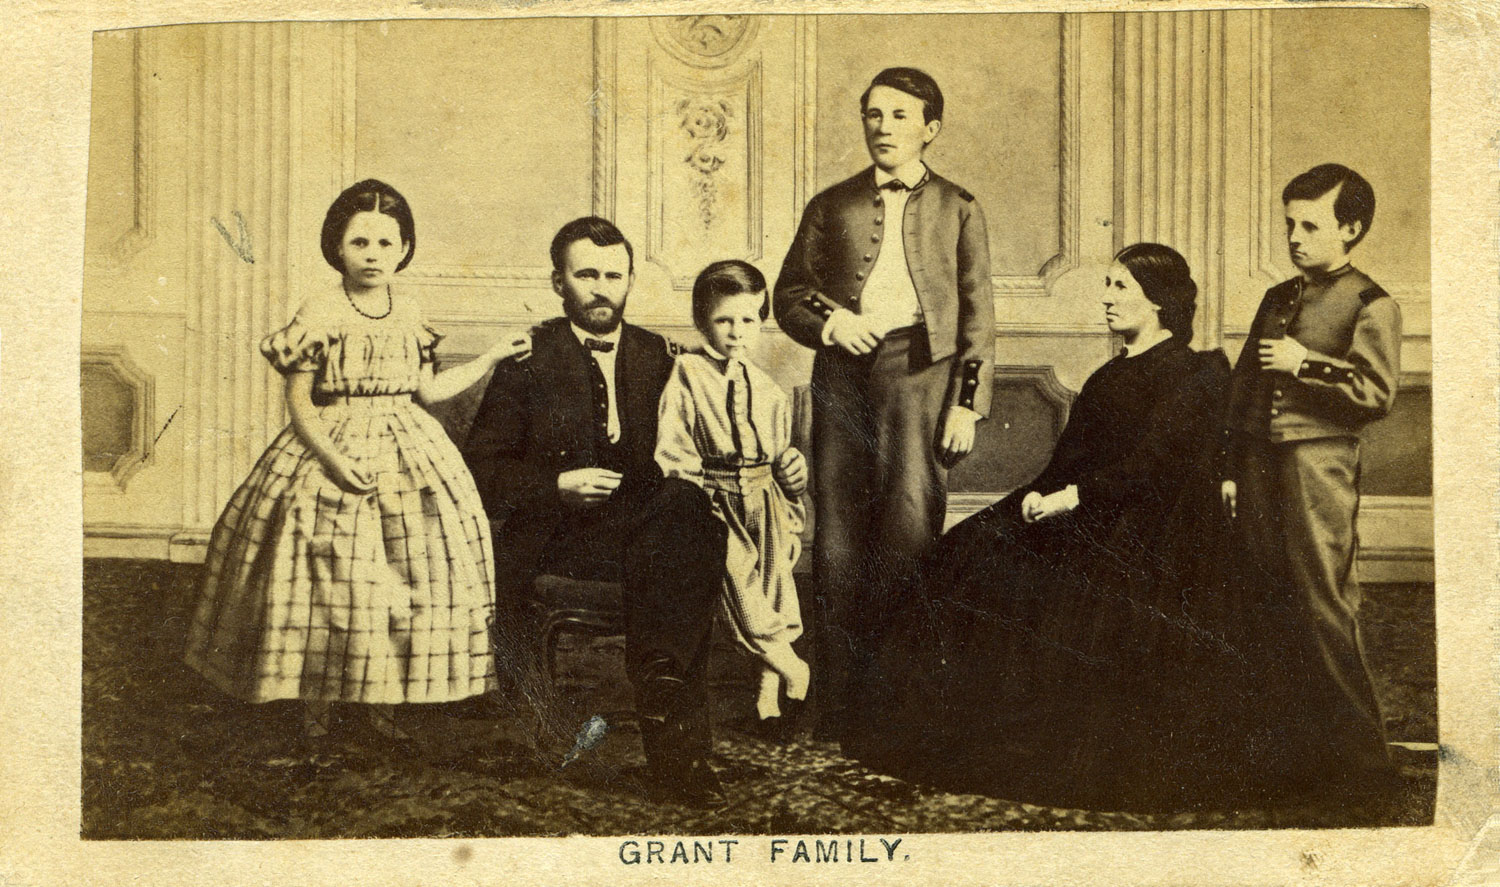 Ulysses S. Grant and Family